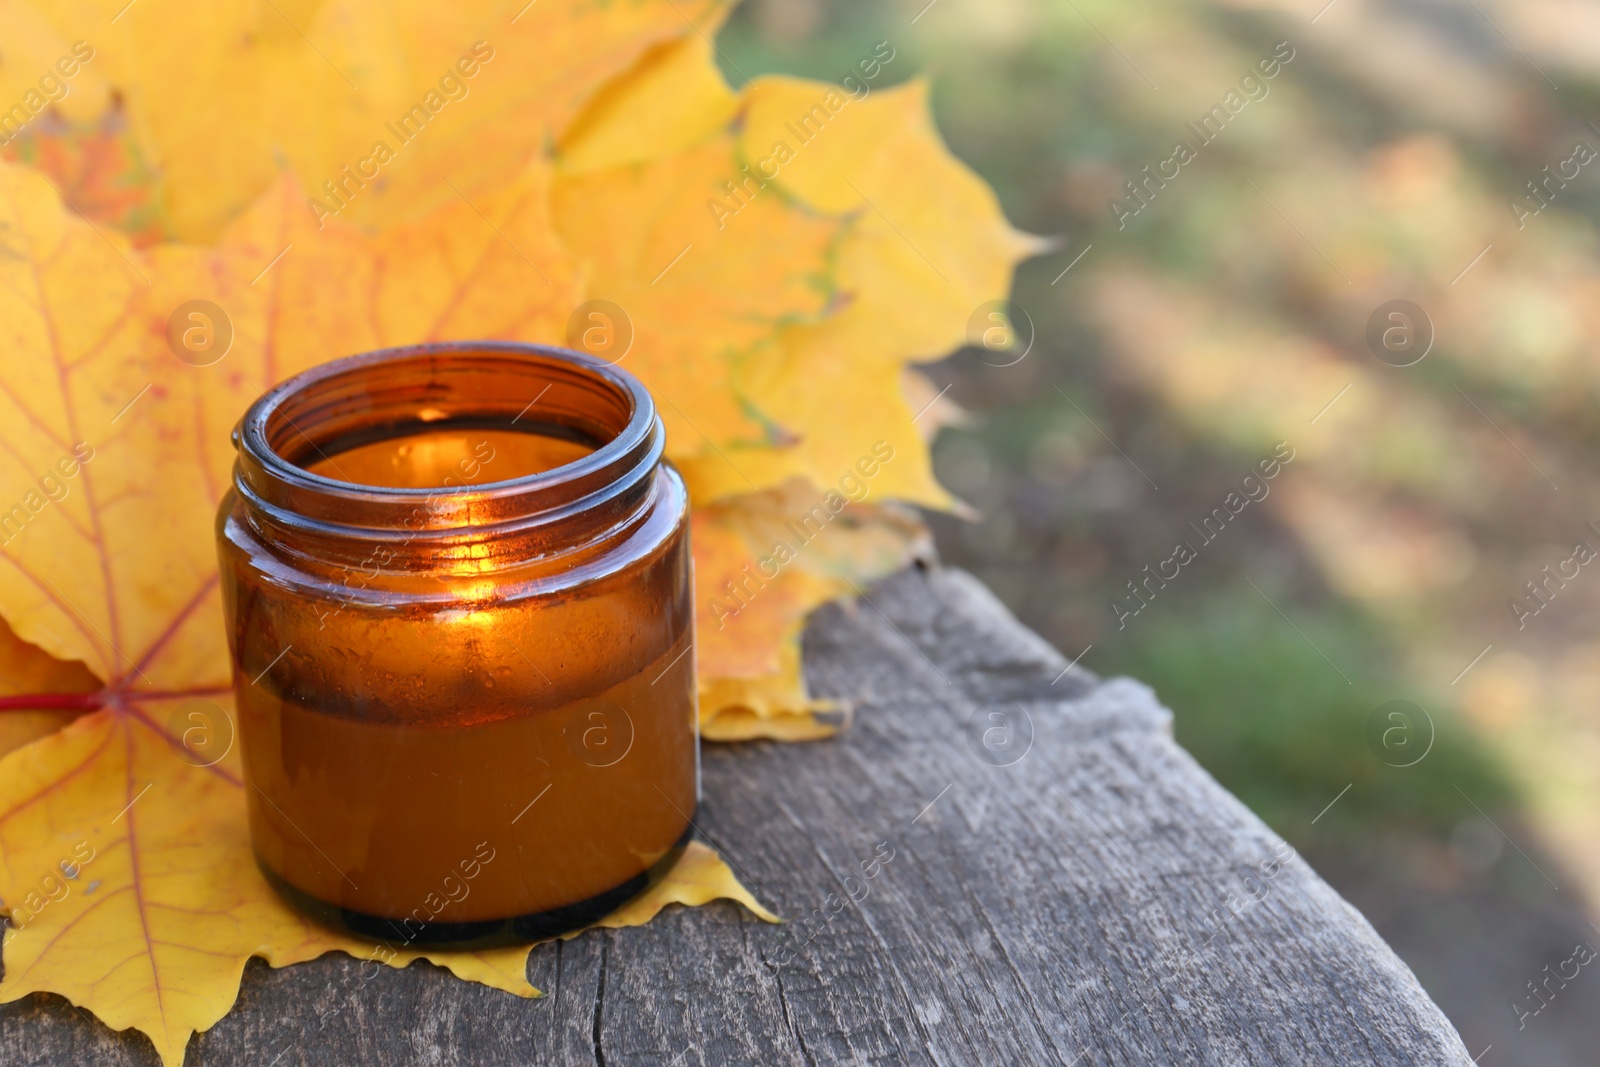 Photo of Burning candle and beautiful dry leaves on wooden surface outdoors, closeup with space for text. Autumn atmosphere